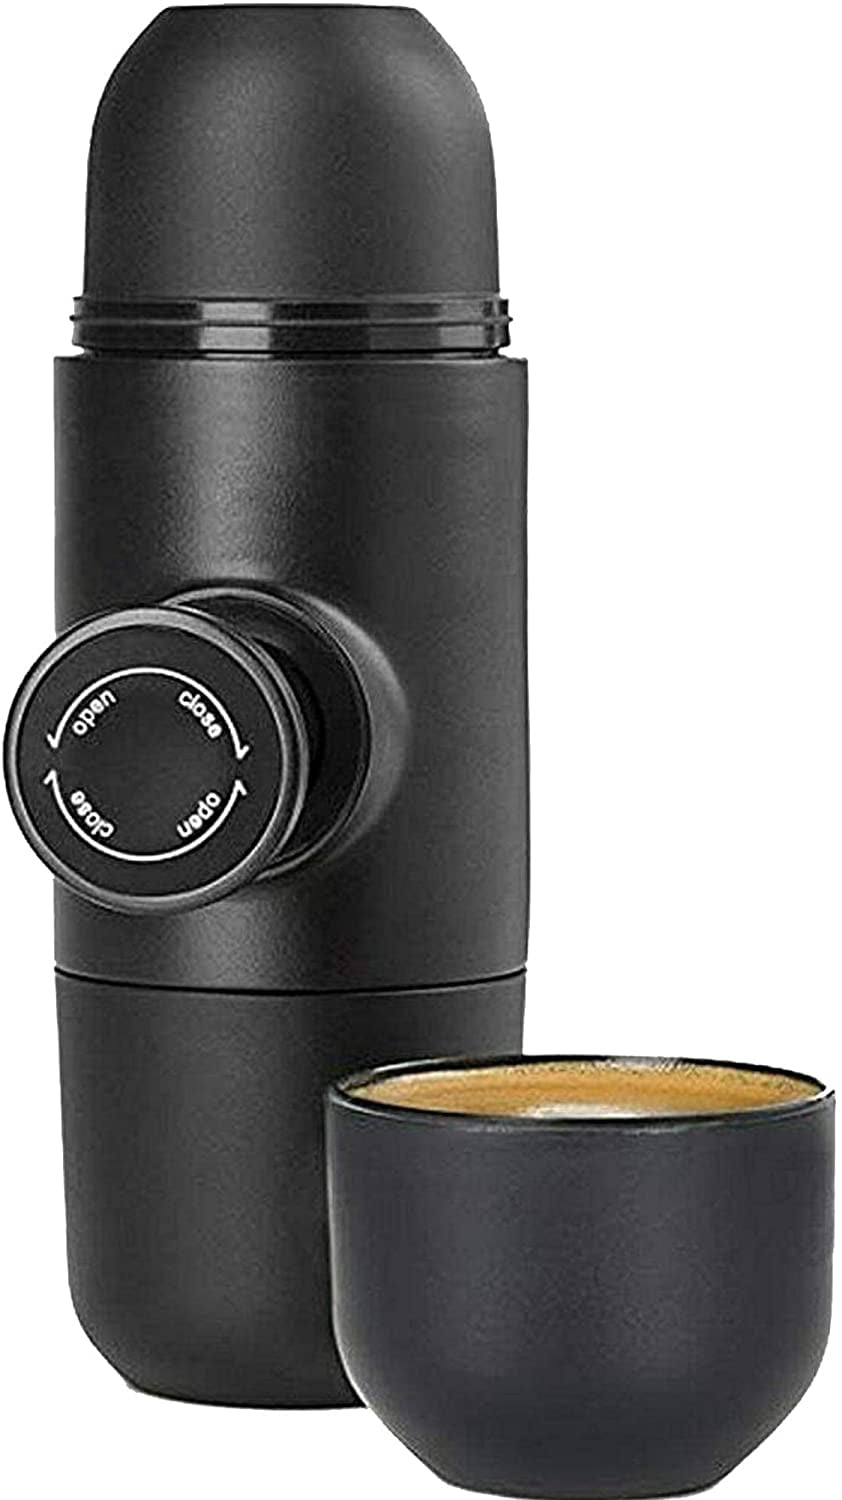  Portable Espresso Machine,Portable Coffee Maker,Electric Espresso  Machine,Espresso Maker Compatible Ground Coffee, Hand Coffee Make for K Cup  Capsules for Camping, Travel, RV, Hiking,Office: Home & Kitchen